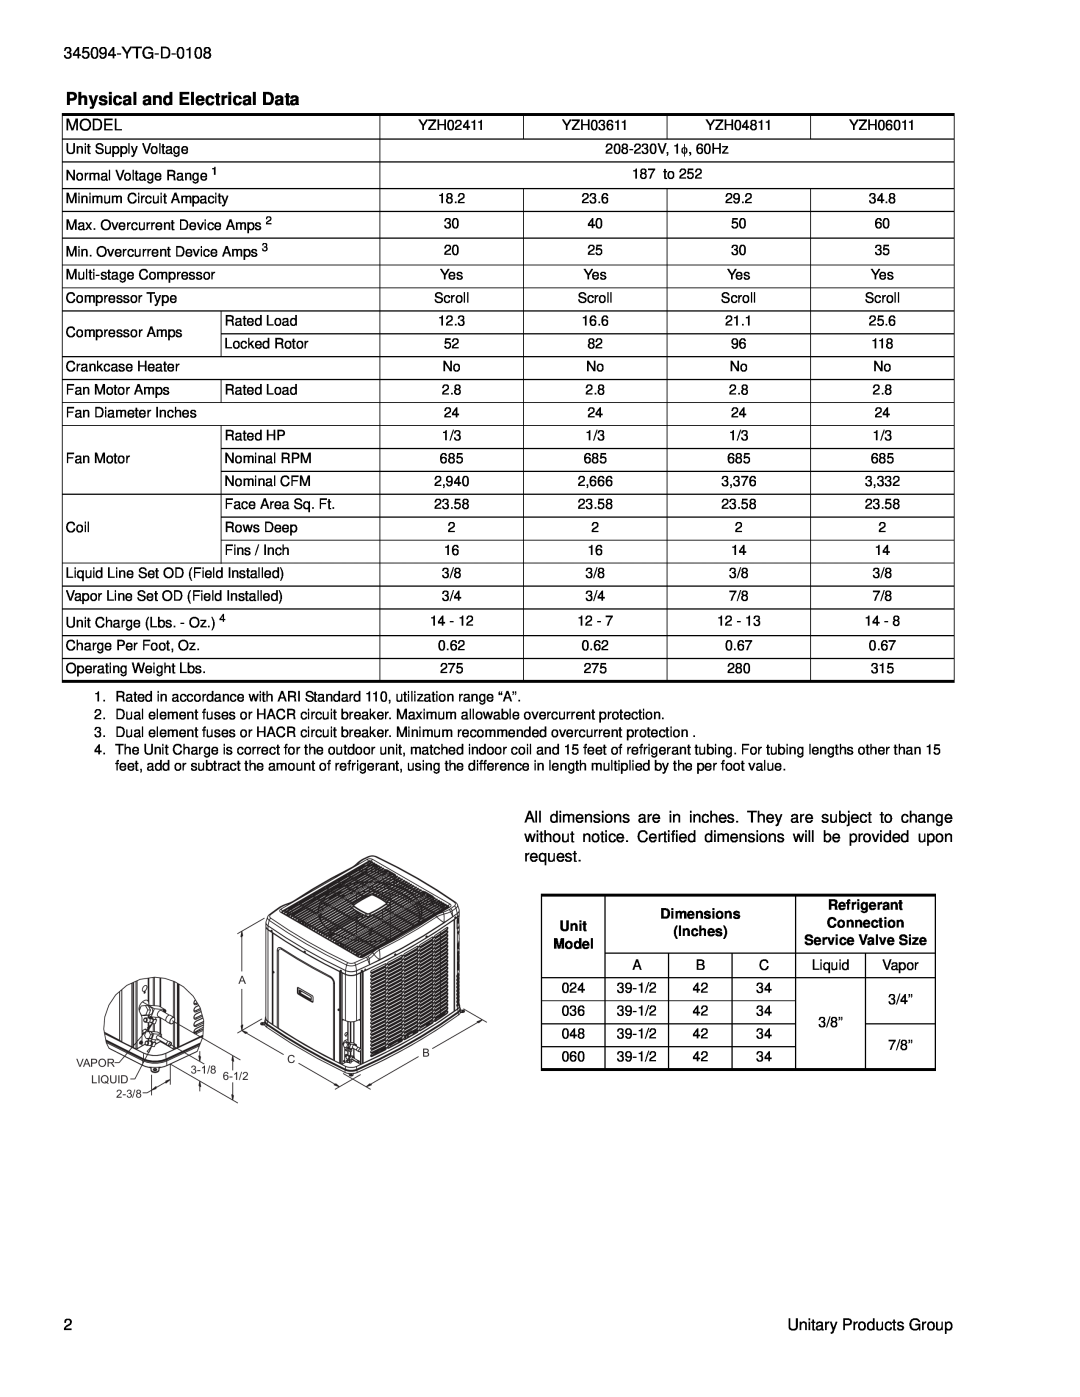 York YZH024 THRU 060 warranty Physical and Electrical Data, YTG-D-0108, Model, request 